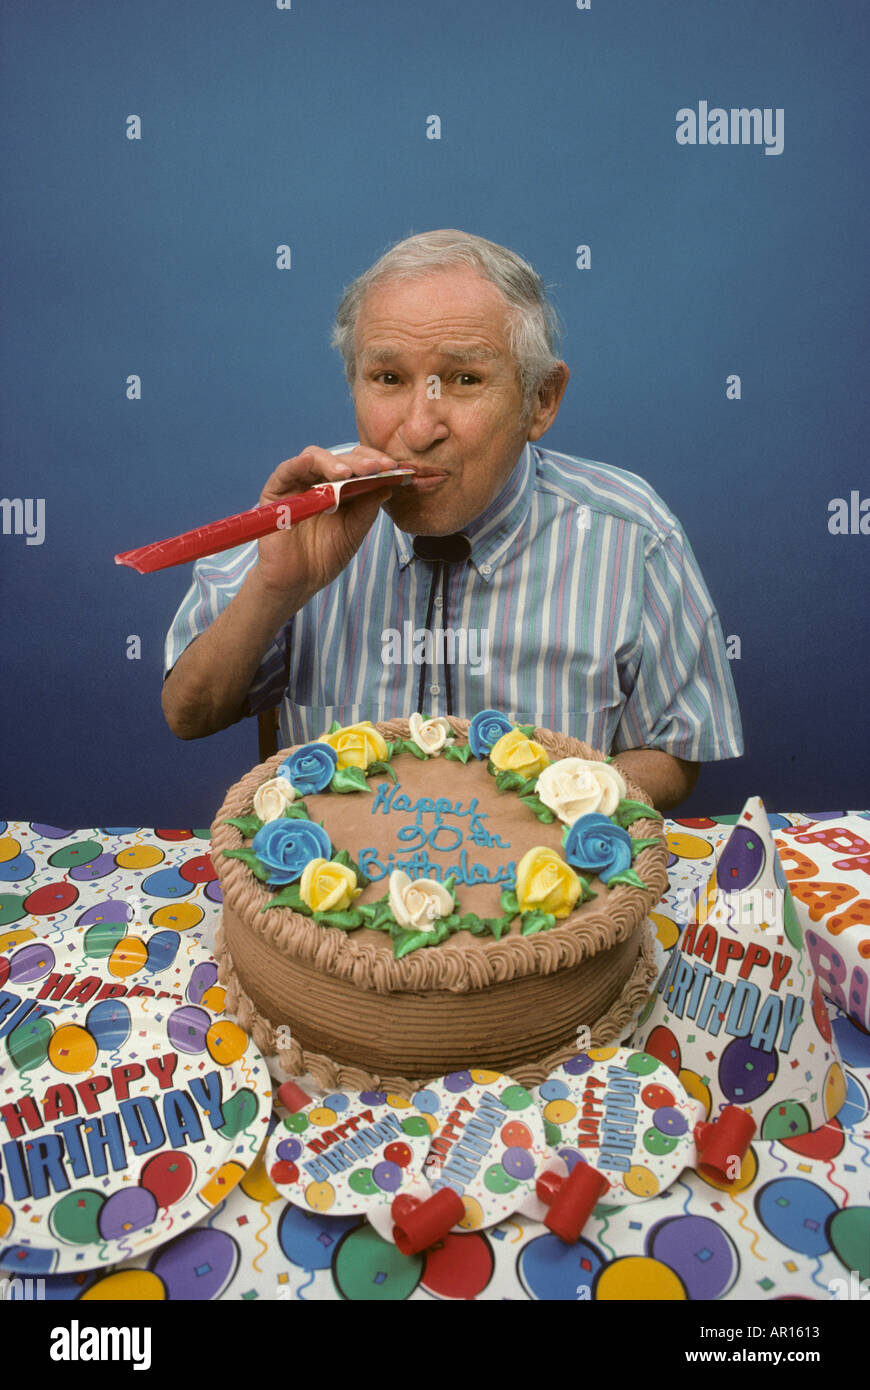 90 Year Old Man Blowing Noisemaker With Birthday Cake Stock Photo